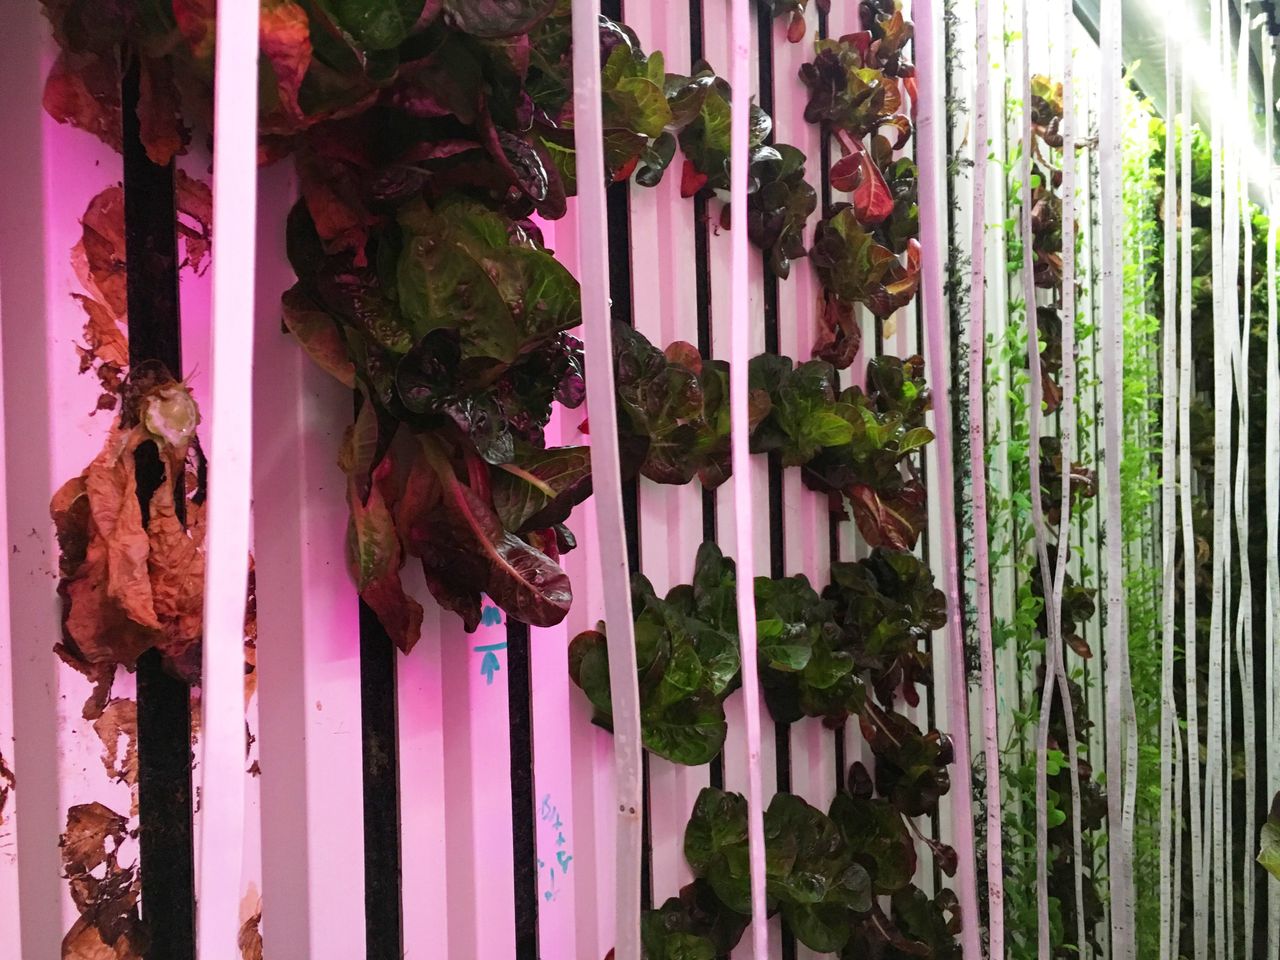 Lettuce and arugula grow on long, vertical trays in the glow of purple LED lights.